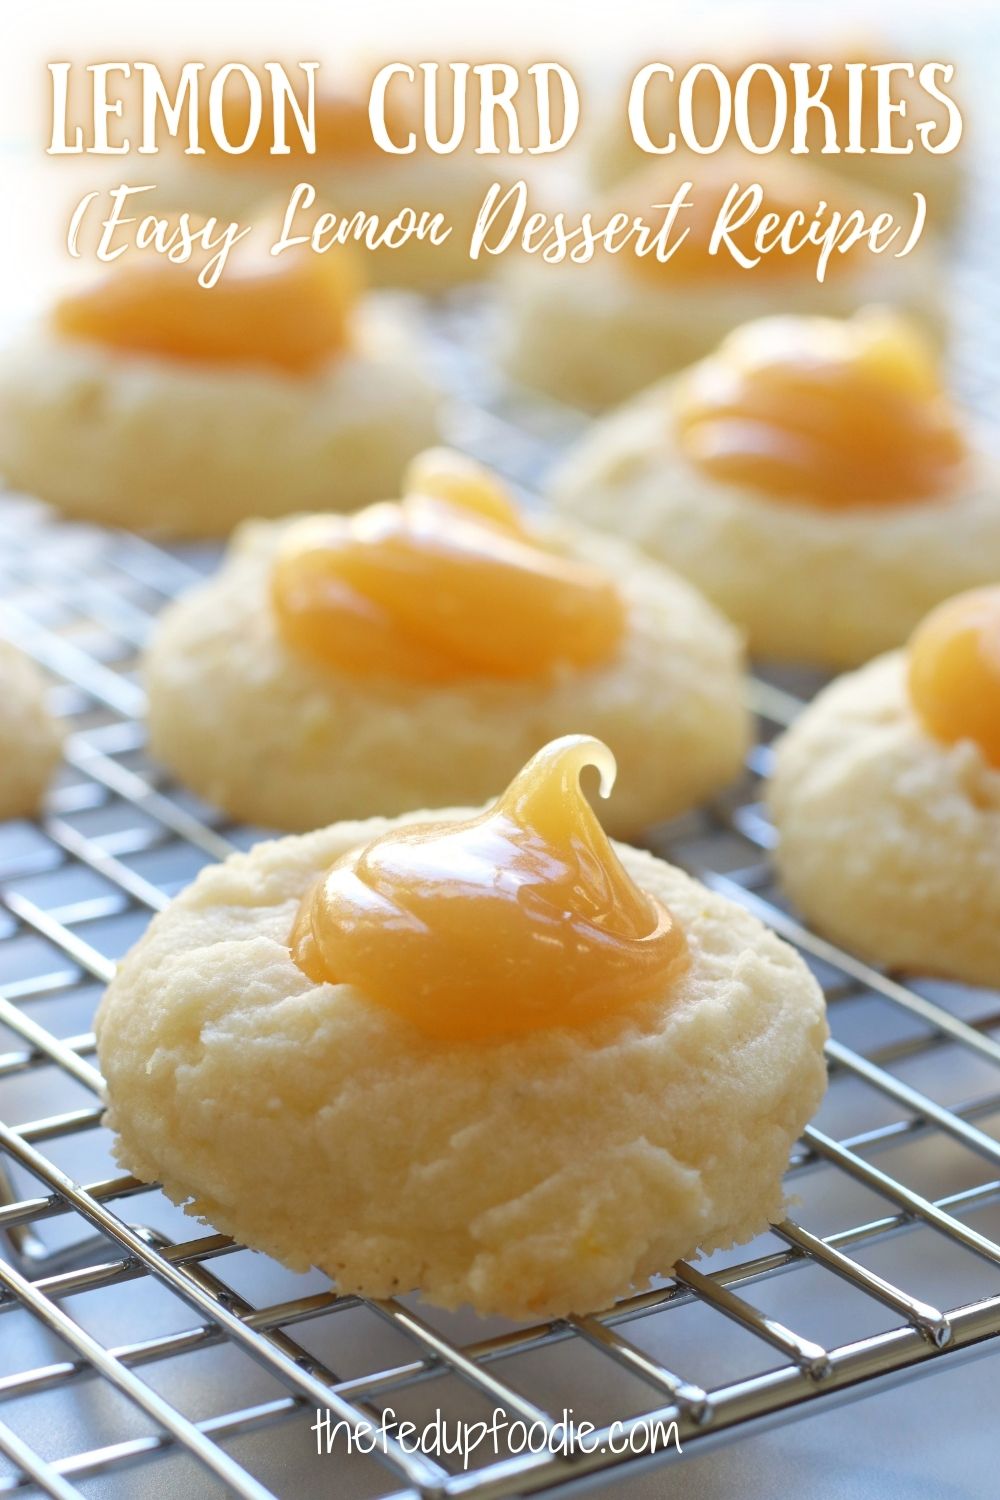 Lemon Curd Cookies have the base of a whipped lemon shortbread cookie that is filled with creamy lemon curd. These cookies are incredibly easy to make and are lusciously divine. Serve them as a special treat for lemon lovers or as a dessert for the holidays, baby showers, bridal showers or summer parties. 
#LemonCurdCookies #LemonCurdUses #WhatToDoWithLemonCurd #Best LemonDesserts #LemonTreats #LemonDesserts #LemonDessertRecipesEasy